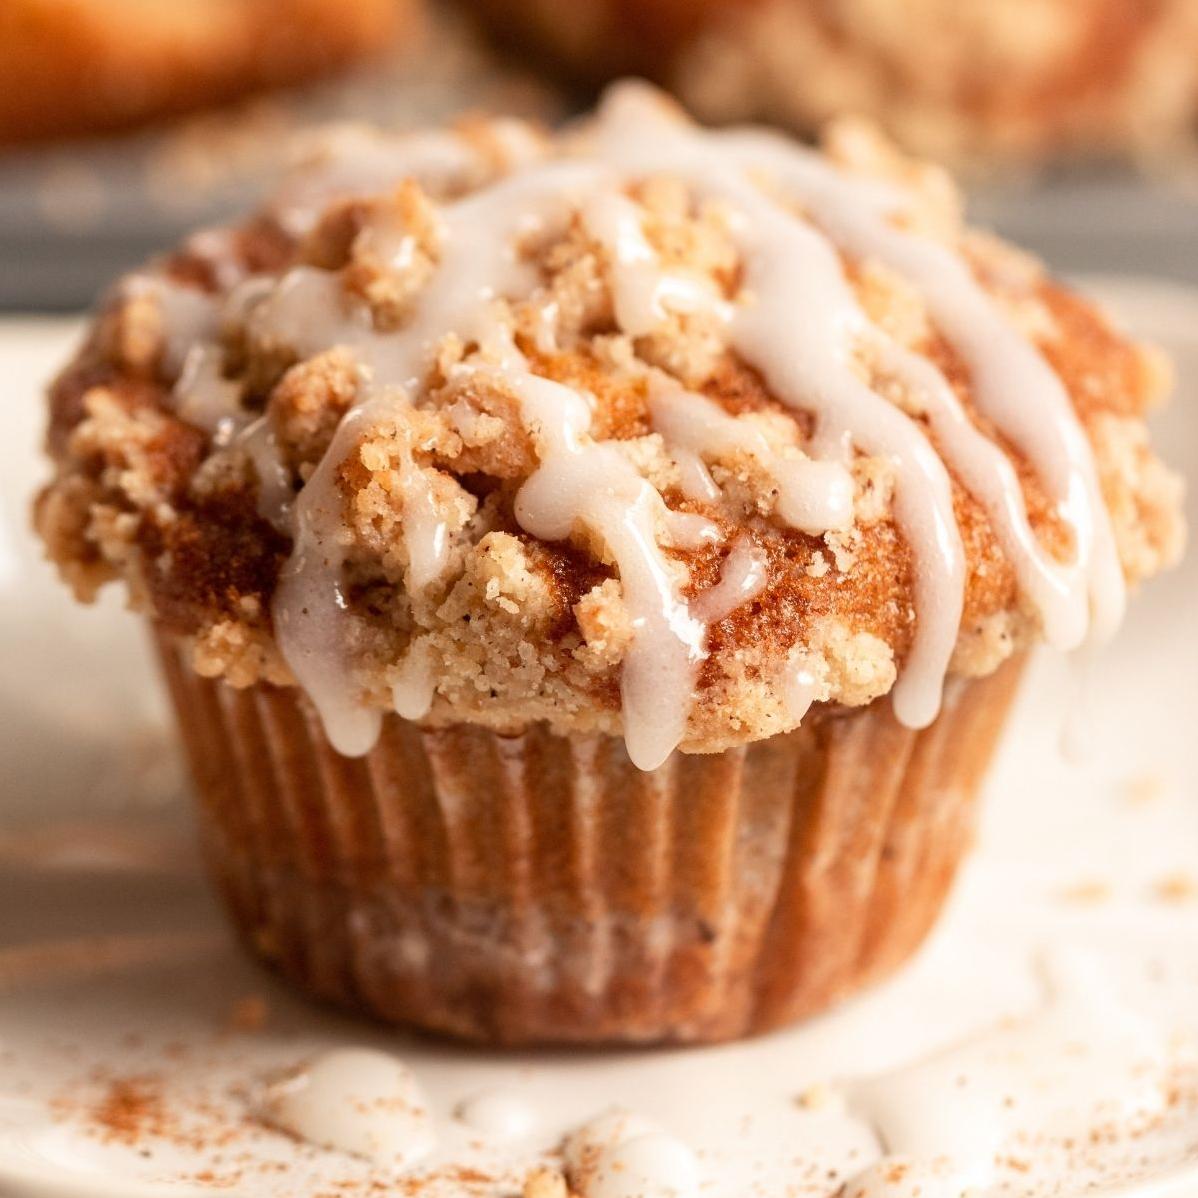  Try this recipe for a delicious coffee-inspired twist on a classic muffin.